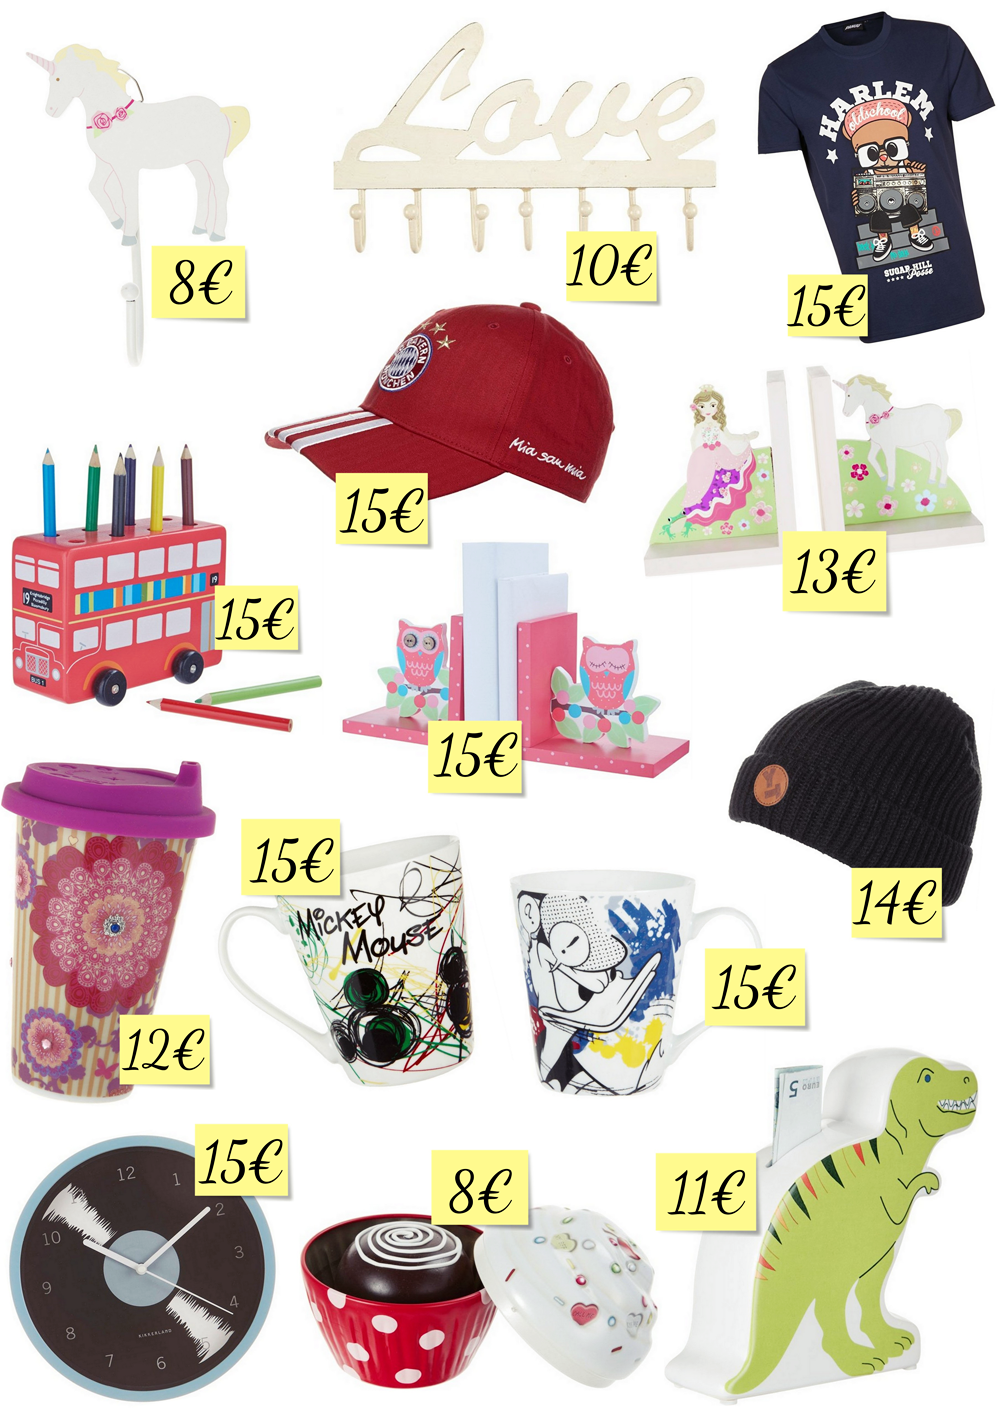 Christmas Time: idee regalo sotto i 15€